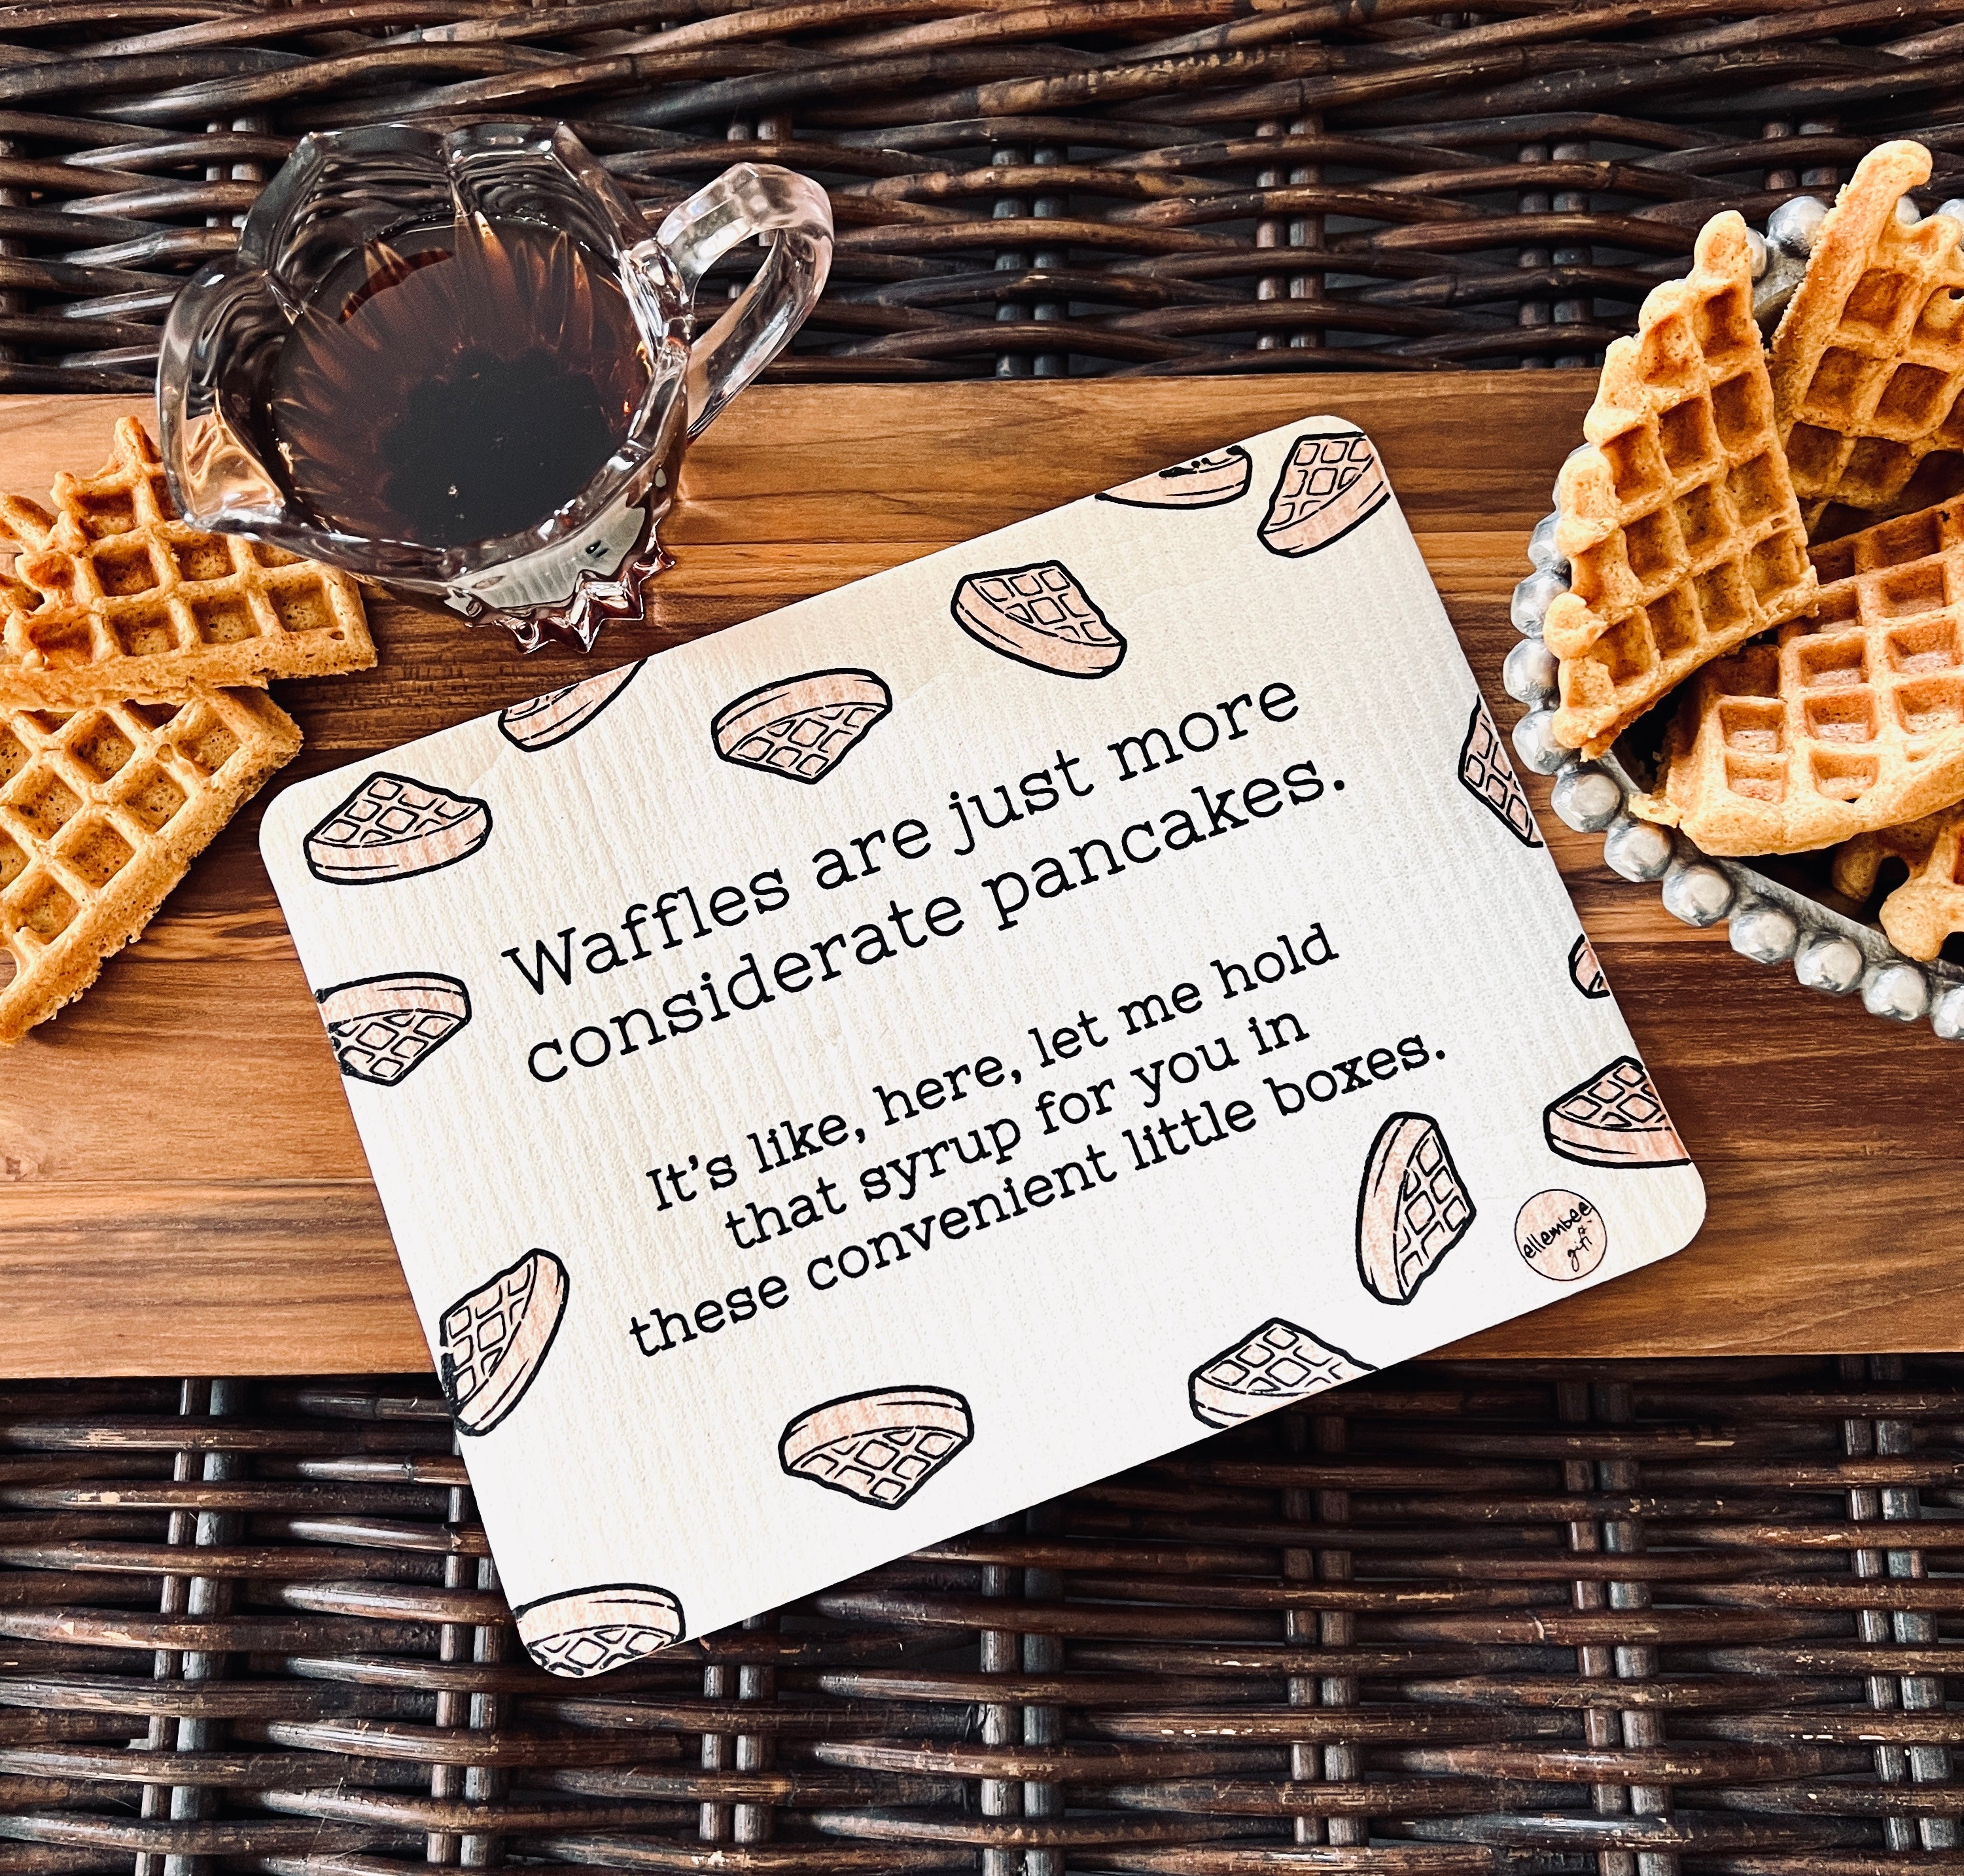 A waffle is just a more considerate pancake.  It's like, let me hold that syrup for you in these convenient boxes Swedish dishcloth